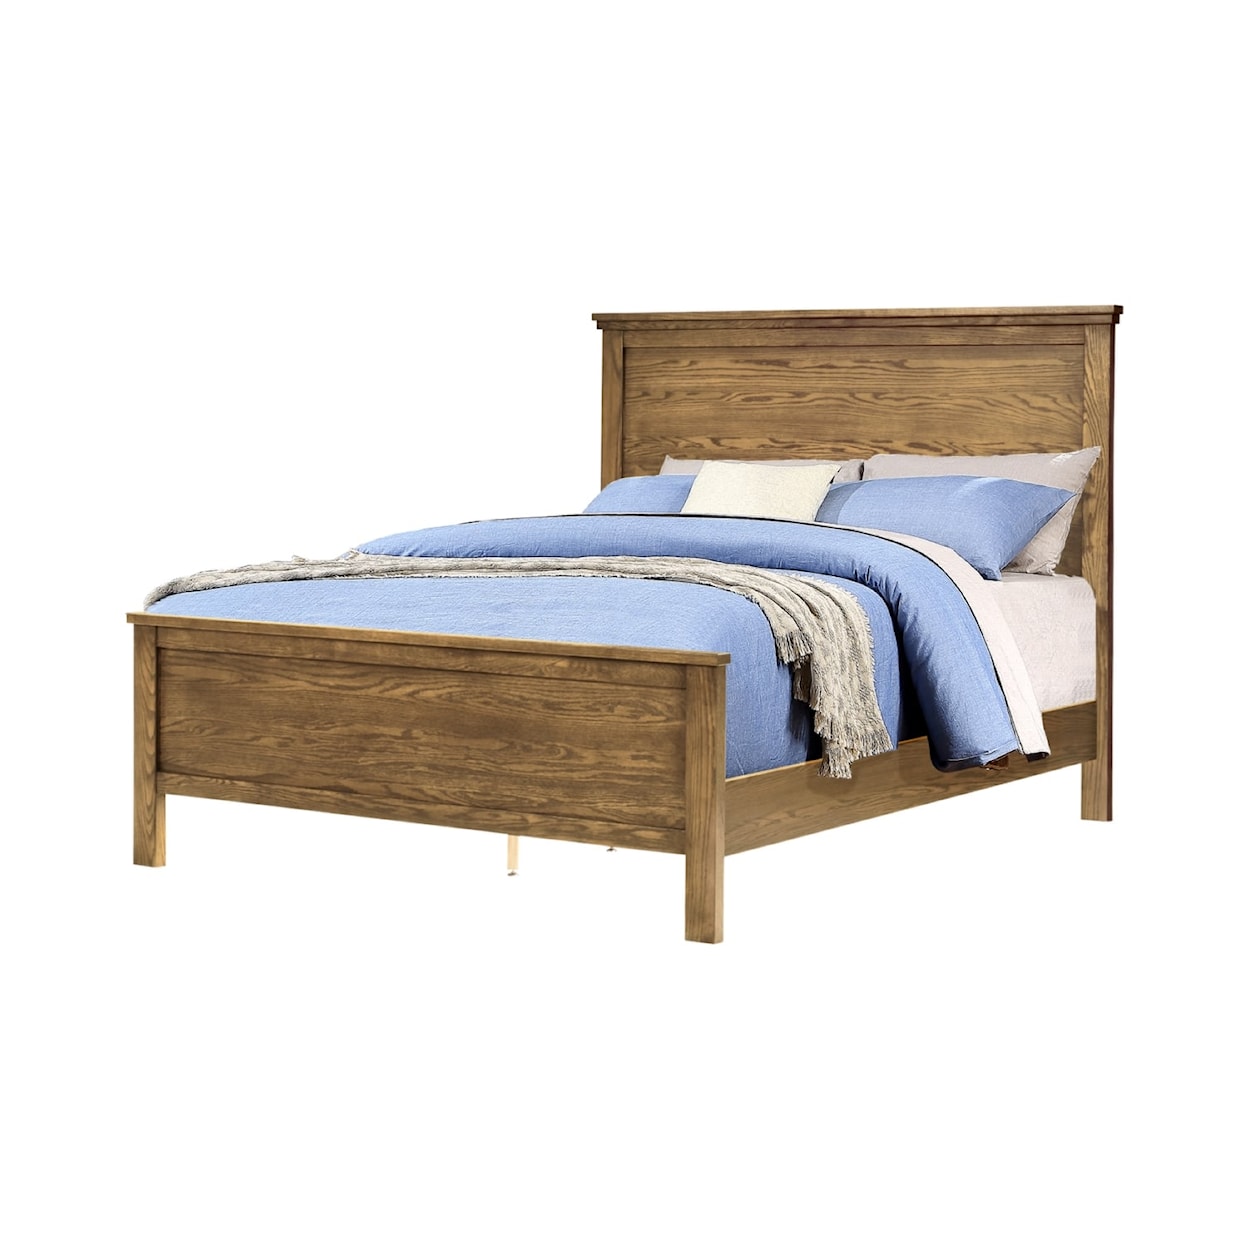 Winners Only Cumberland Panel Cal King Bed